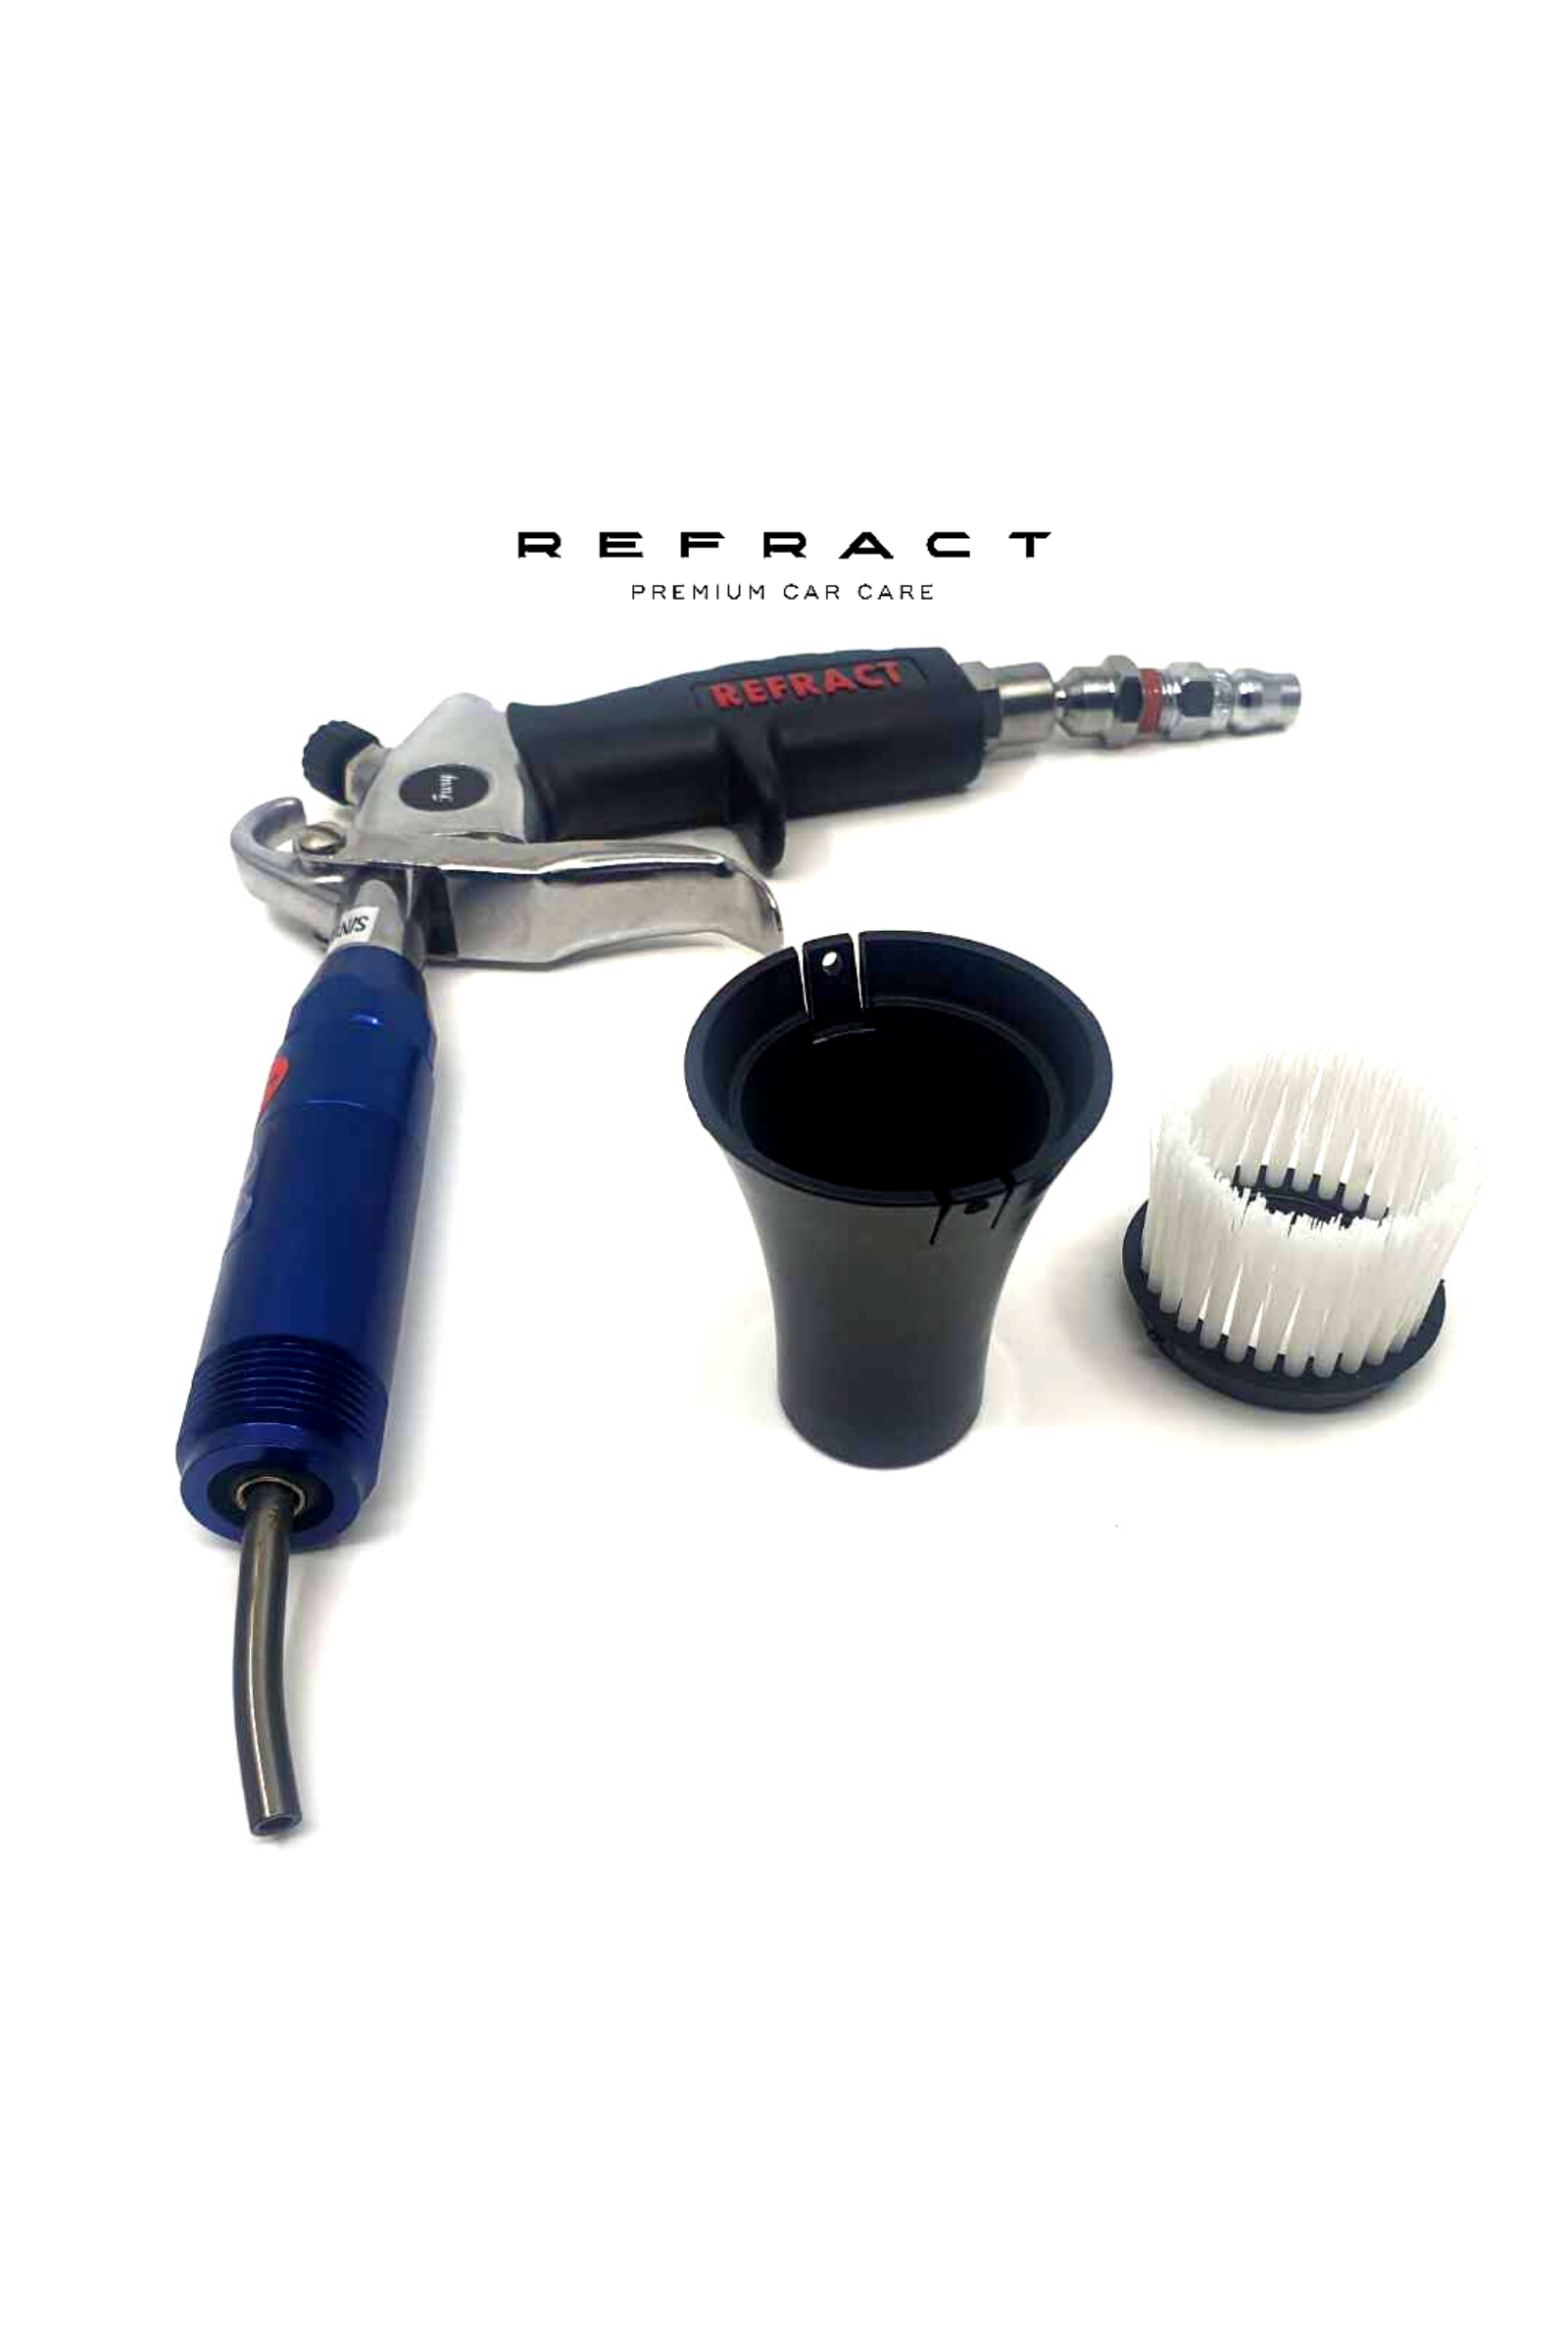 Refract Premium Car Care Products REFRACT Fury HD Interior Tornador Air Cleaning Gun $149.95